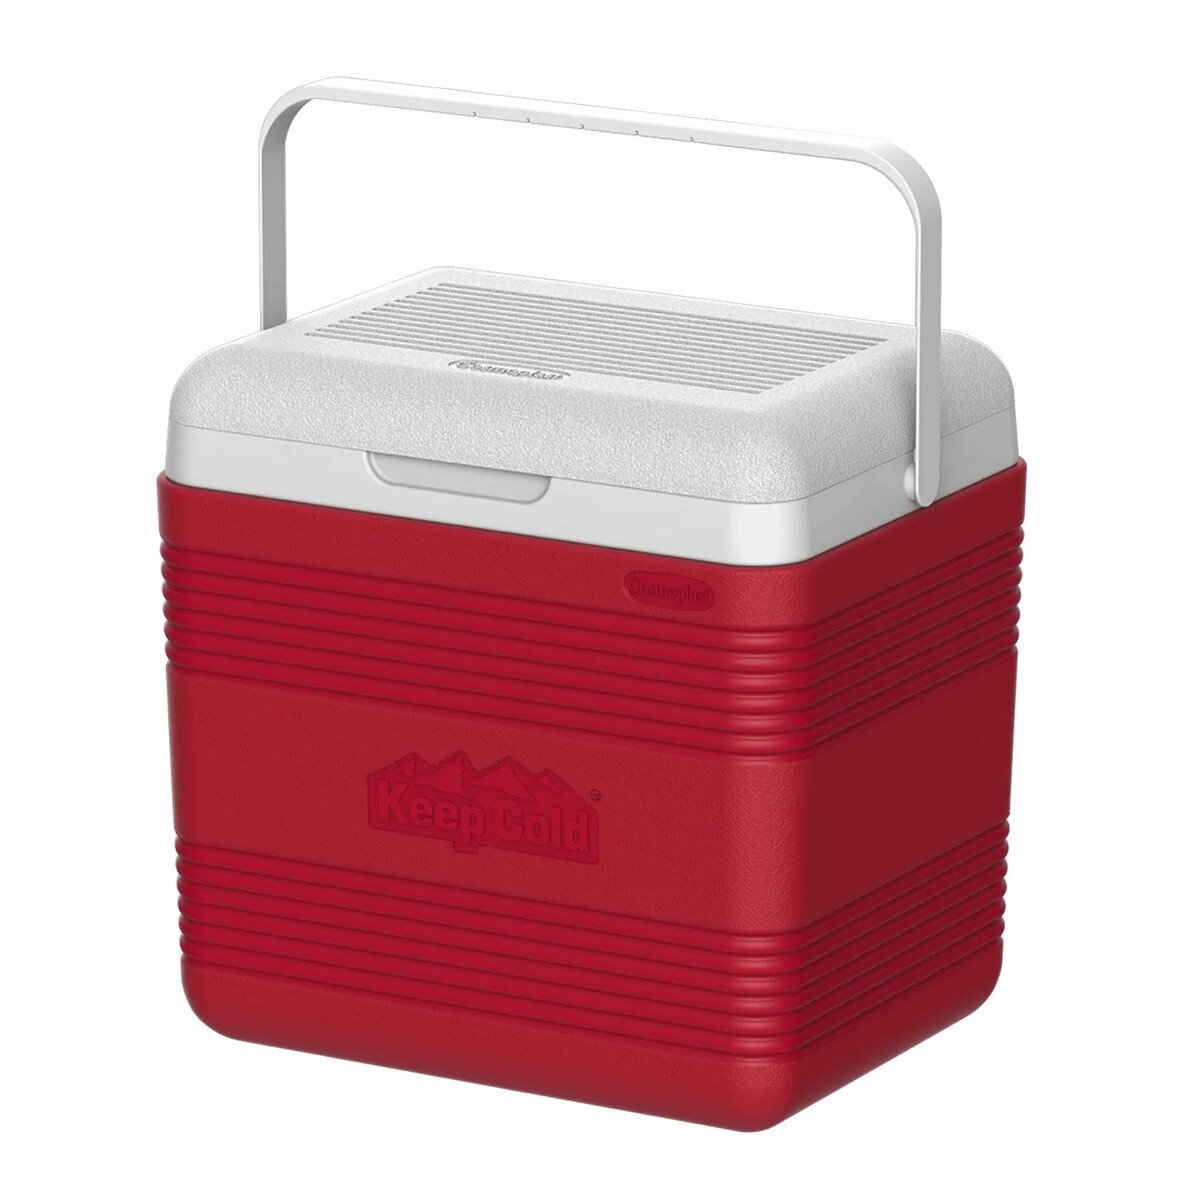 Keep Cold Deluxe Icebox MFIBXX068 18L Assorted Colors